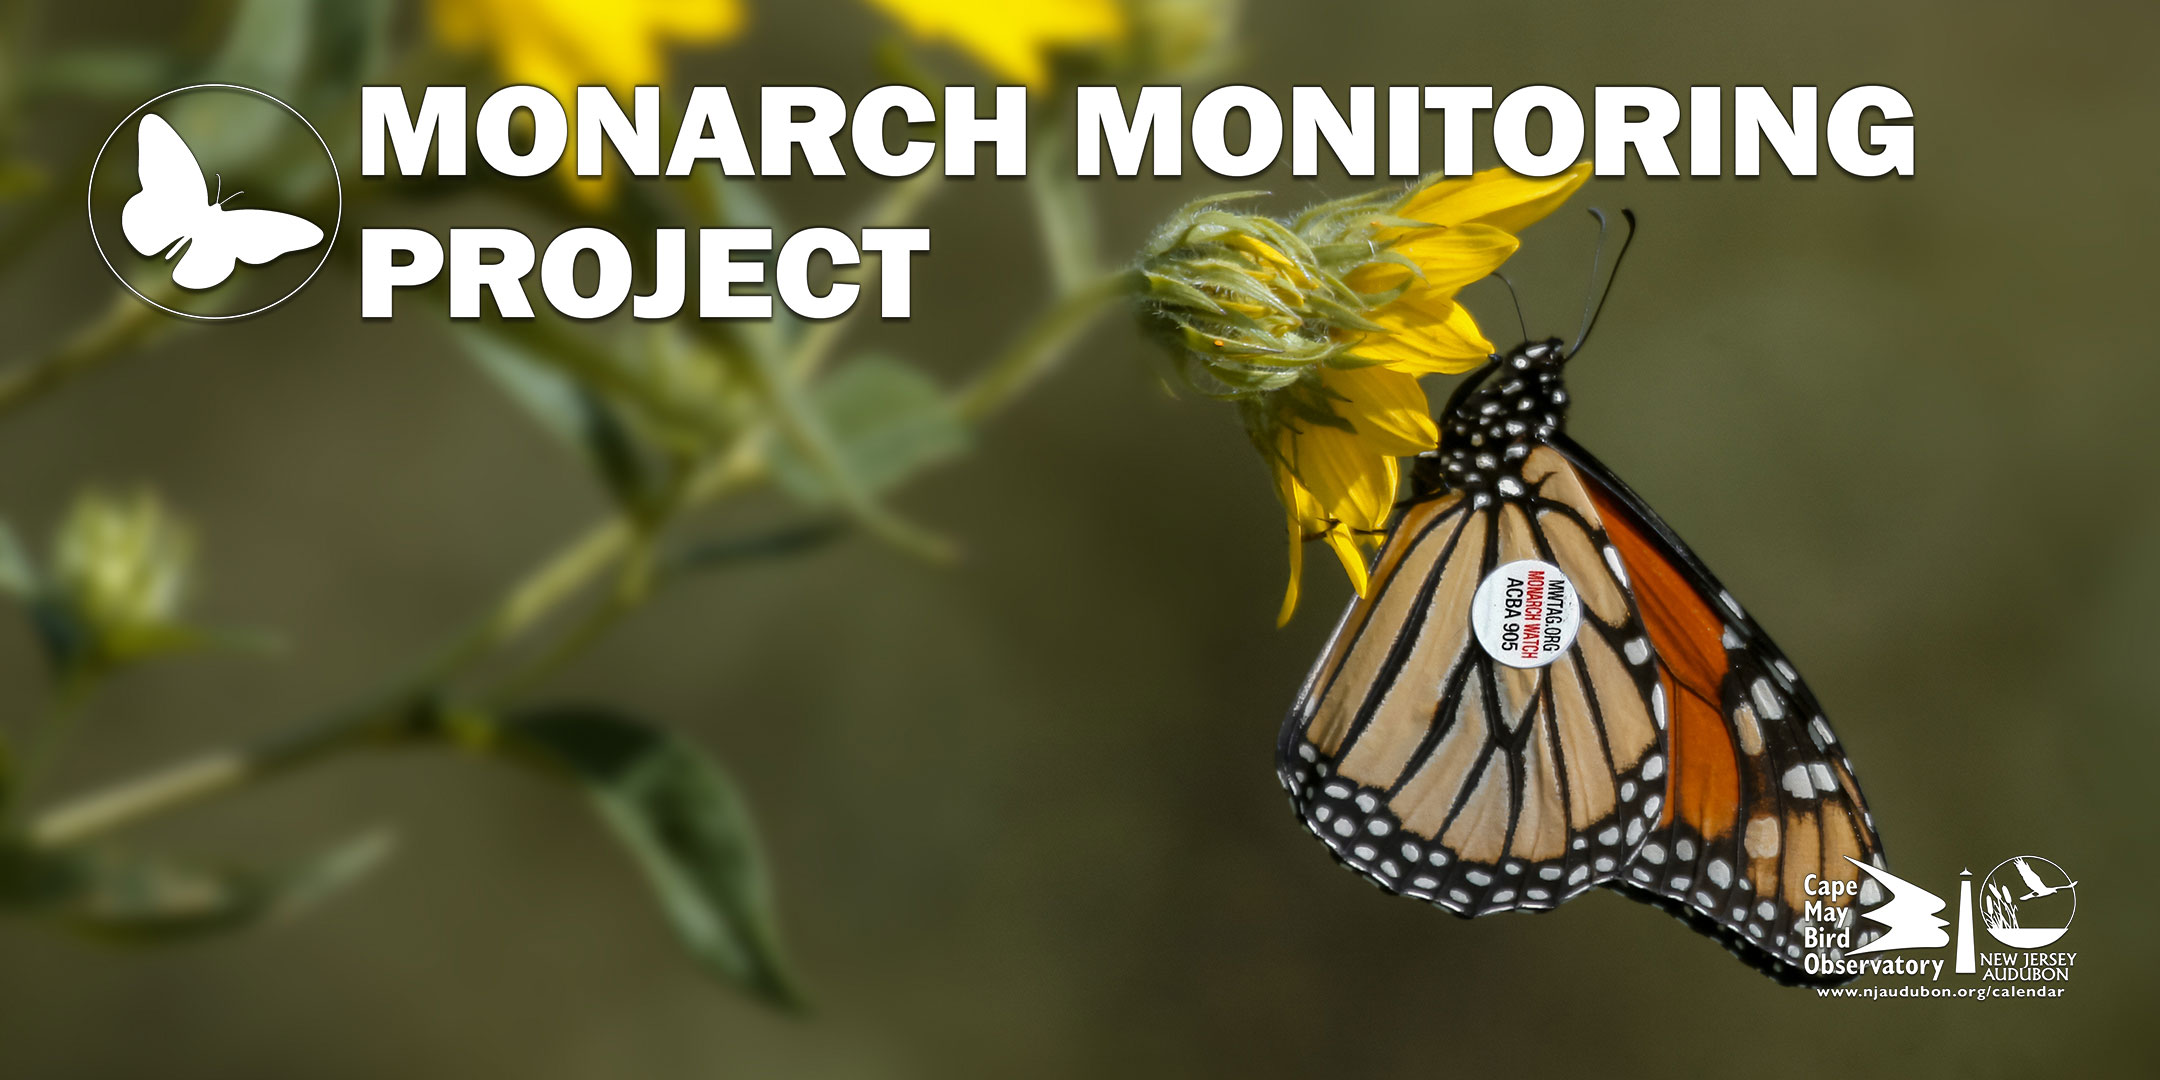 Monarch butterfly migration moves south, but numbers may be